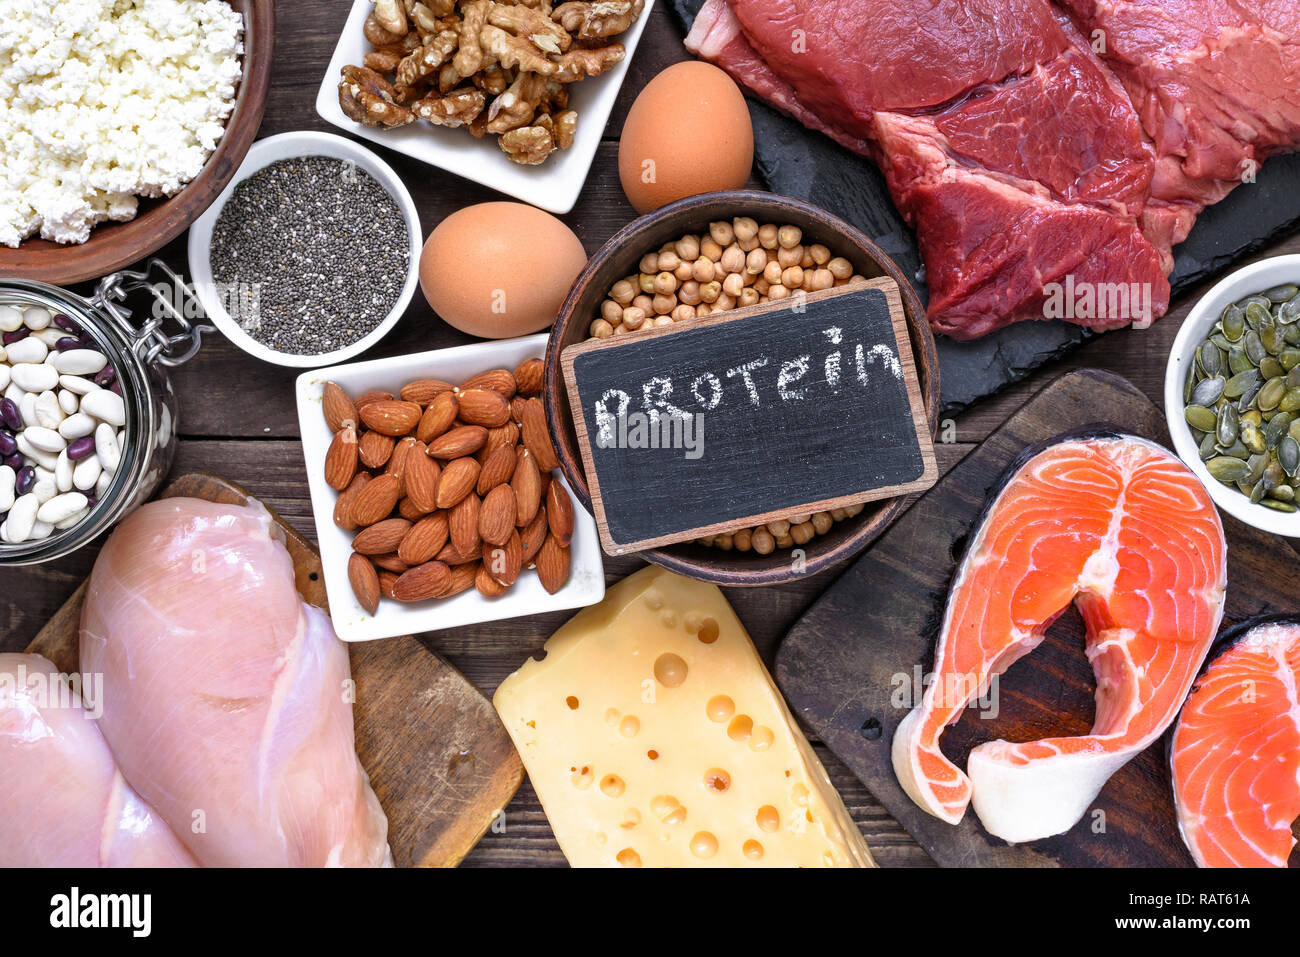 selection food sources of protein. healthy diet eating concept. top view Stock Photo